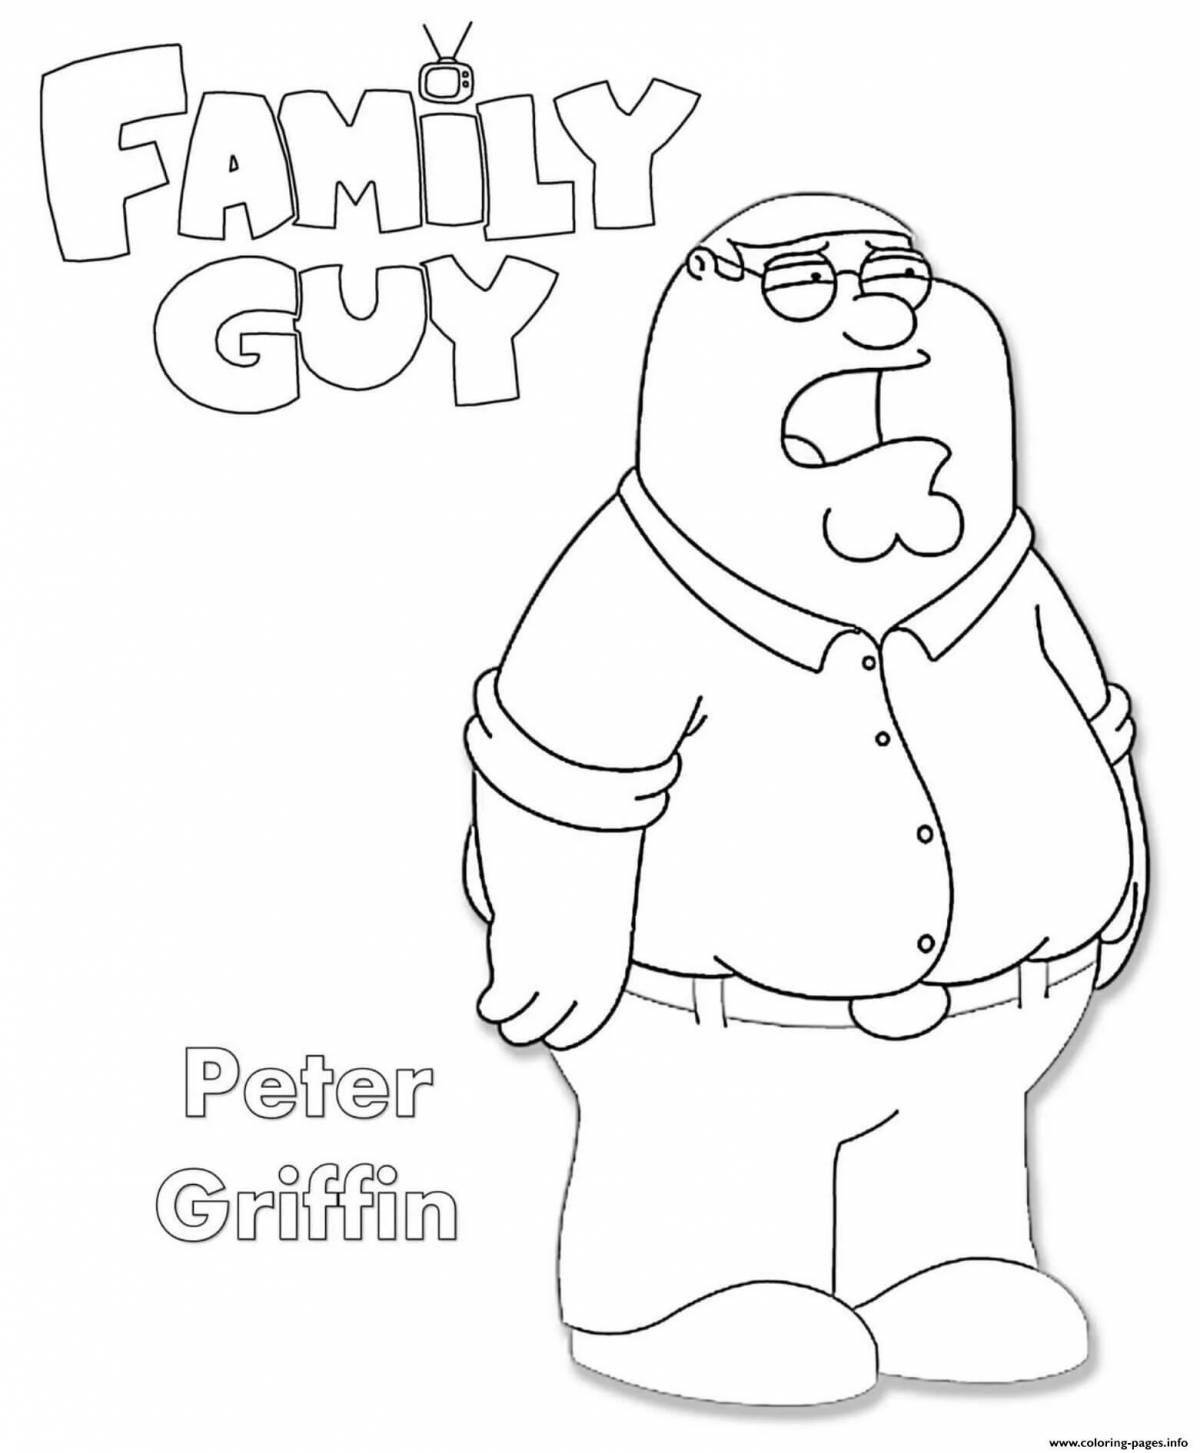 Peter griffin #2